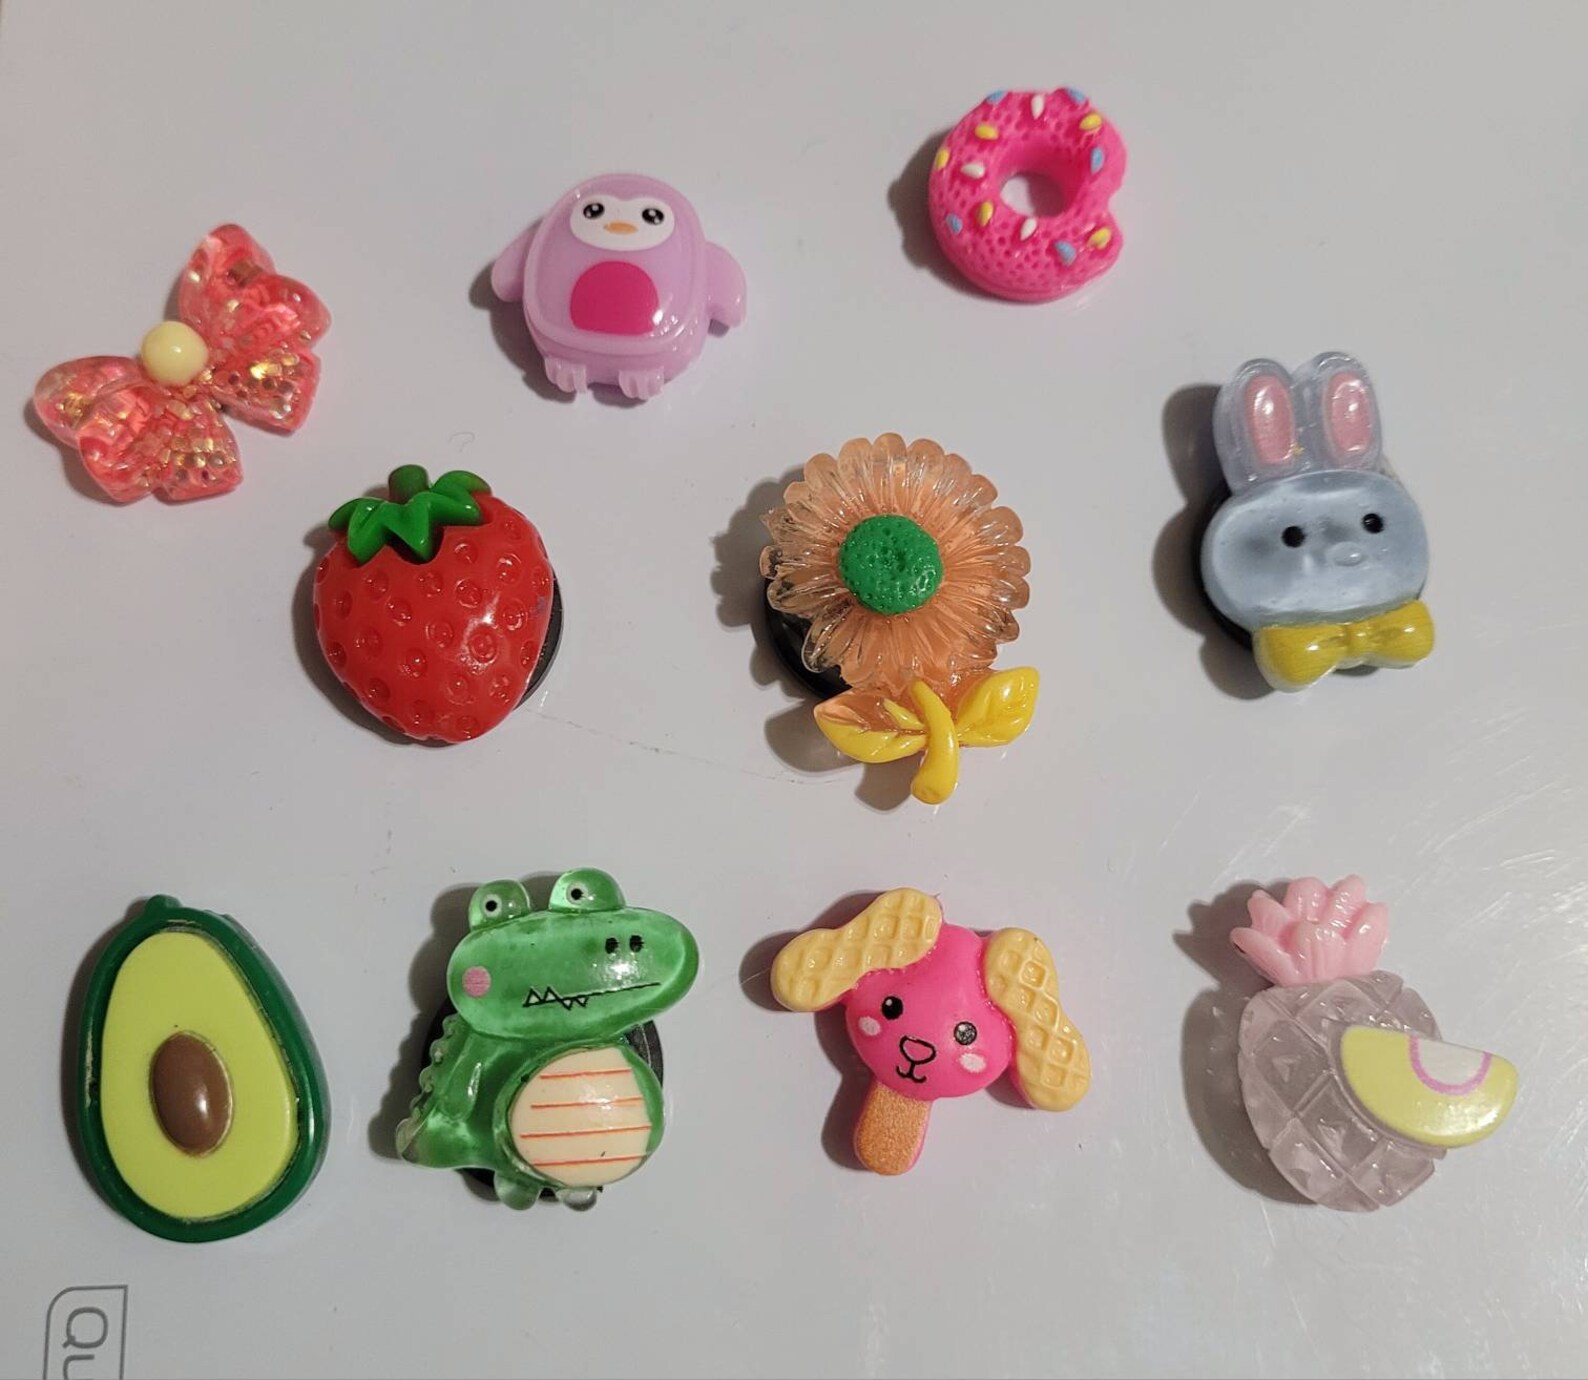 10 Cute Decorative Magnets for Fridge or Office Food Magnets - Etsy